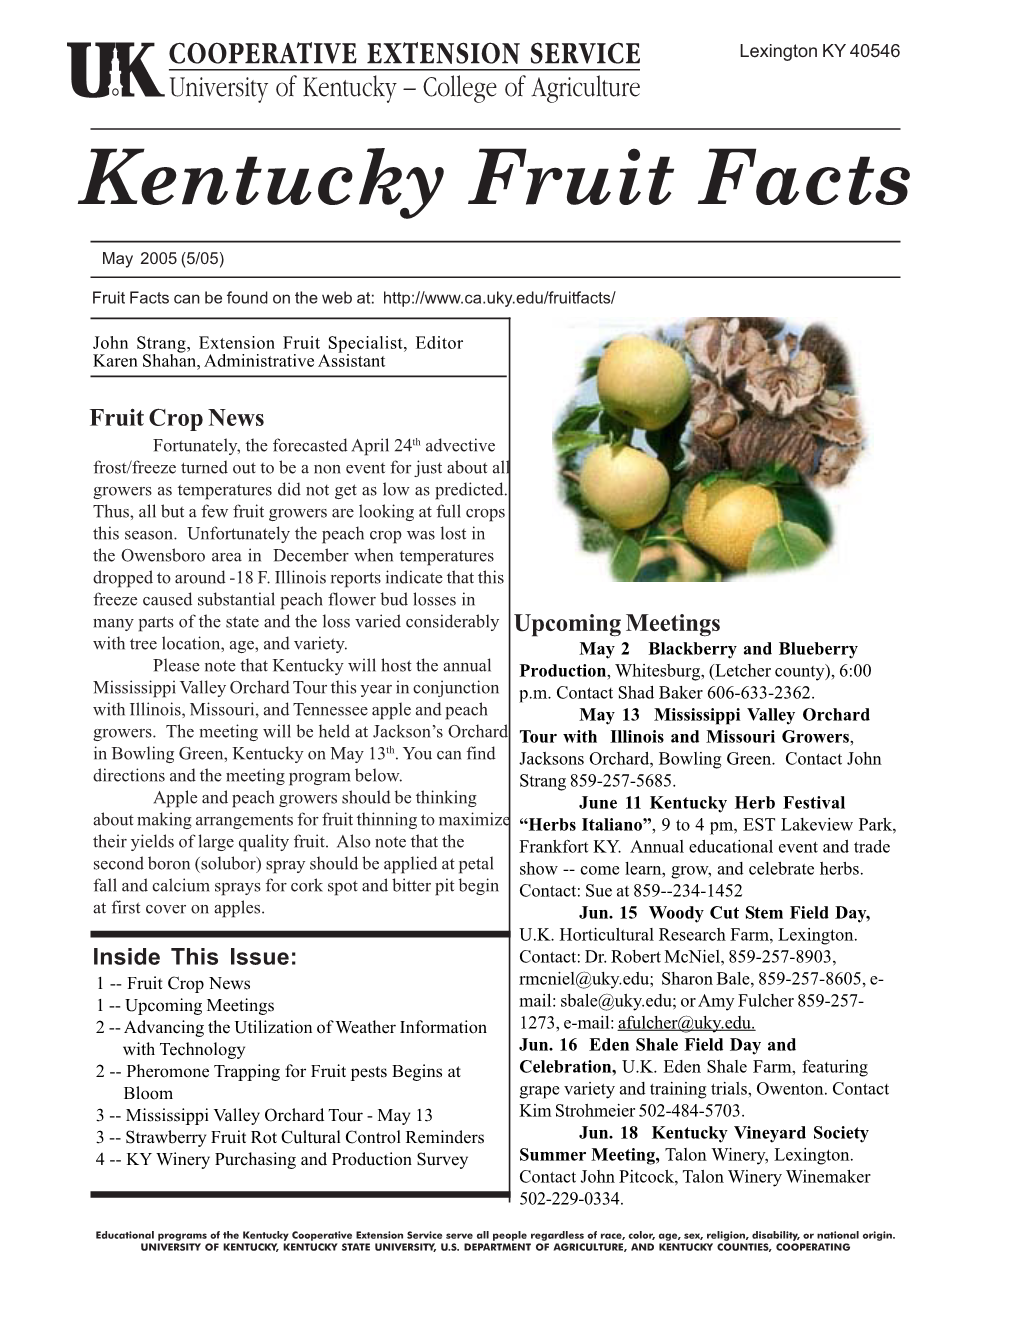 Fruit Facts, 2005-05